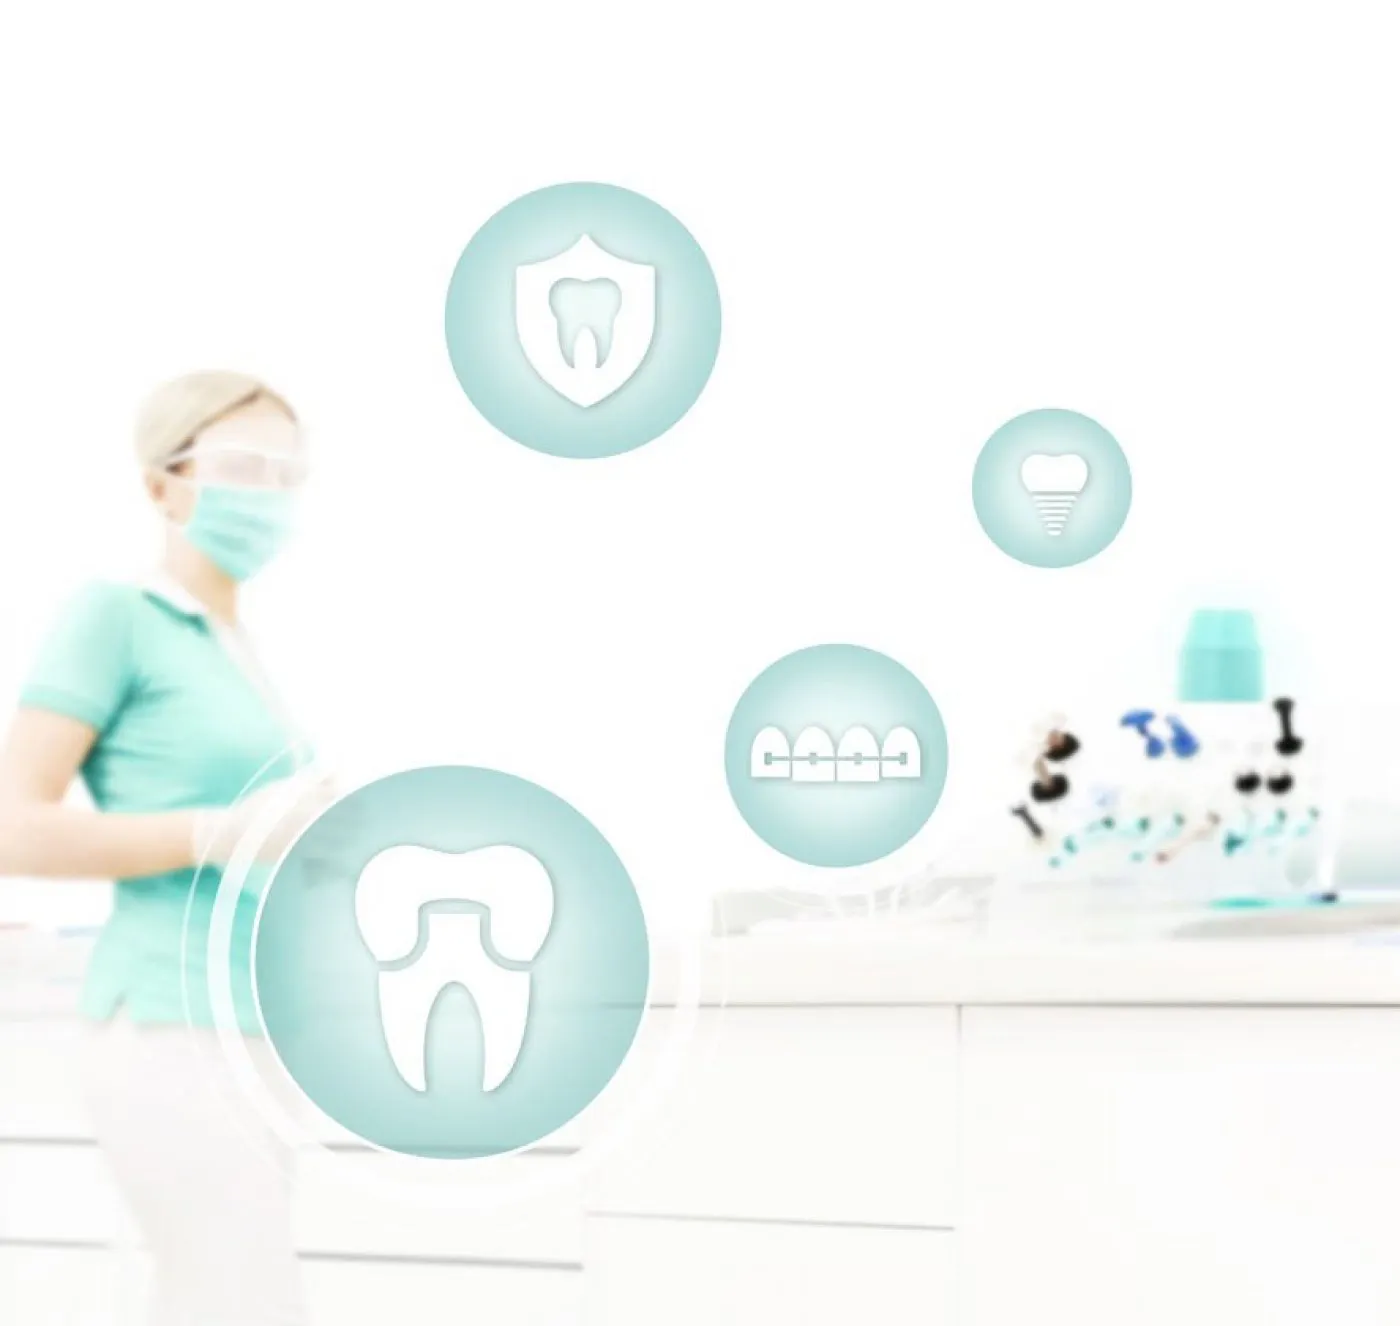 Longwell Green Advicecare Commondentalconditions